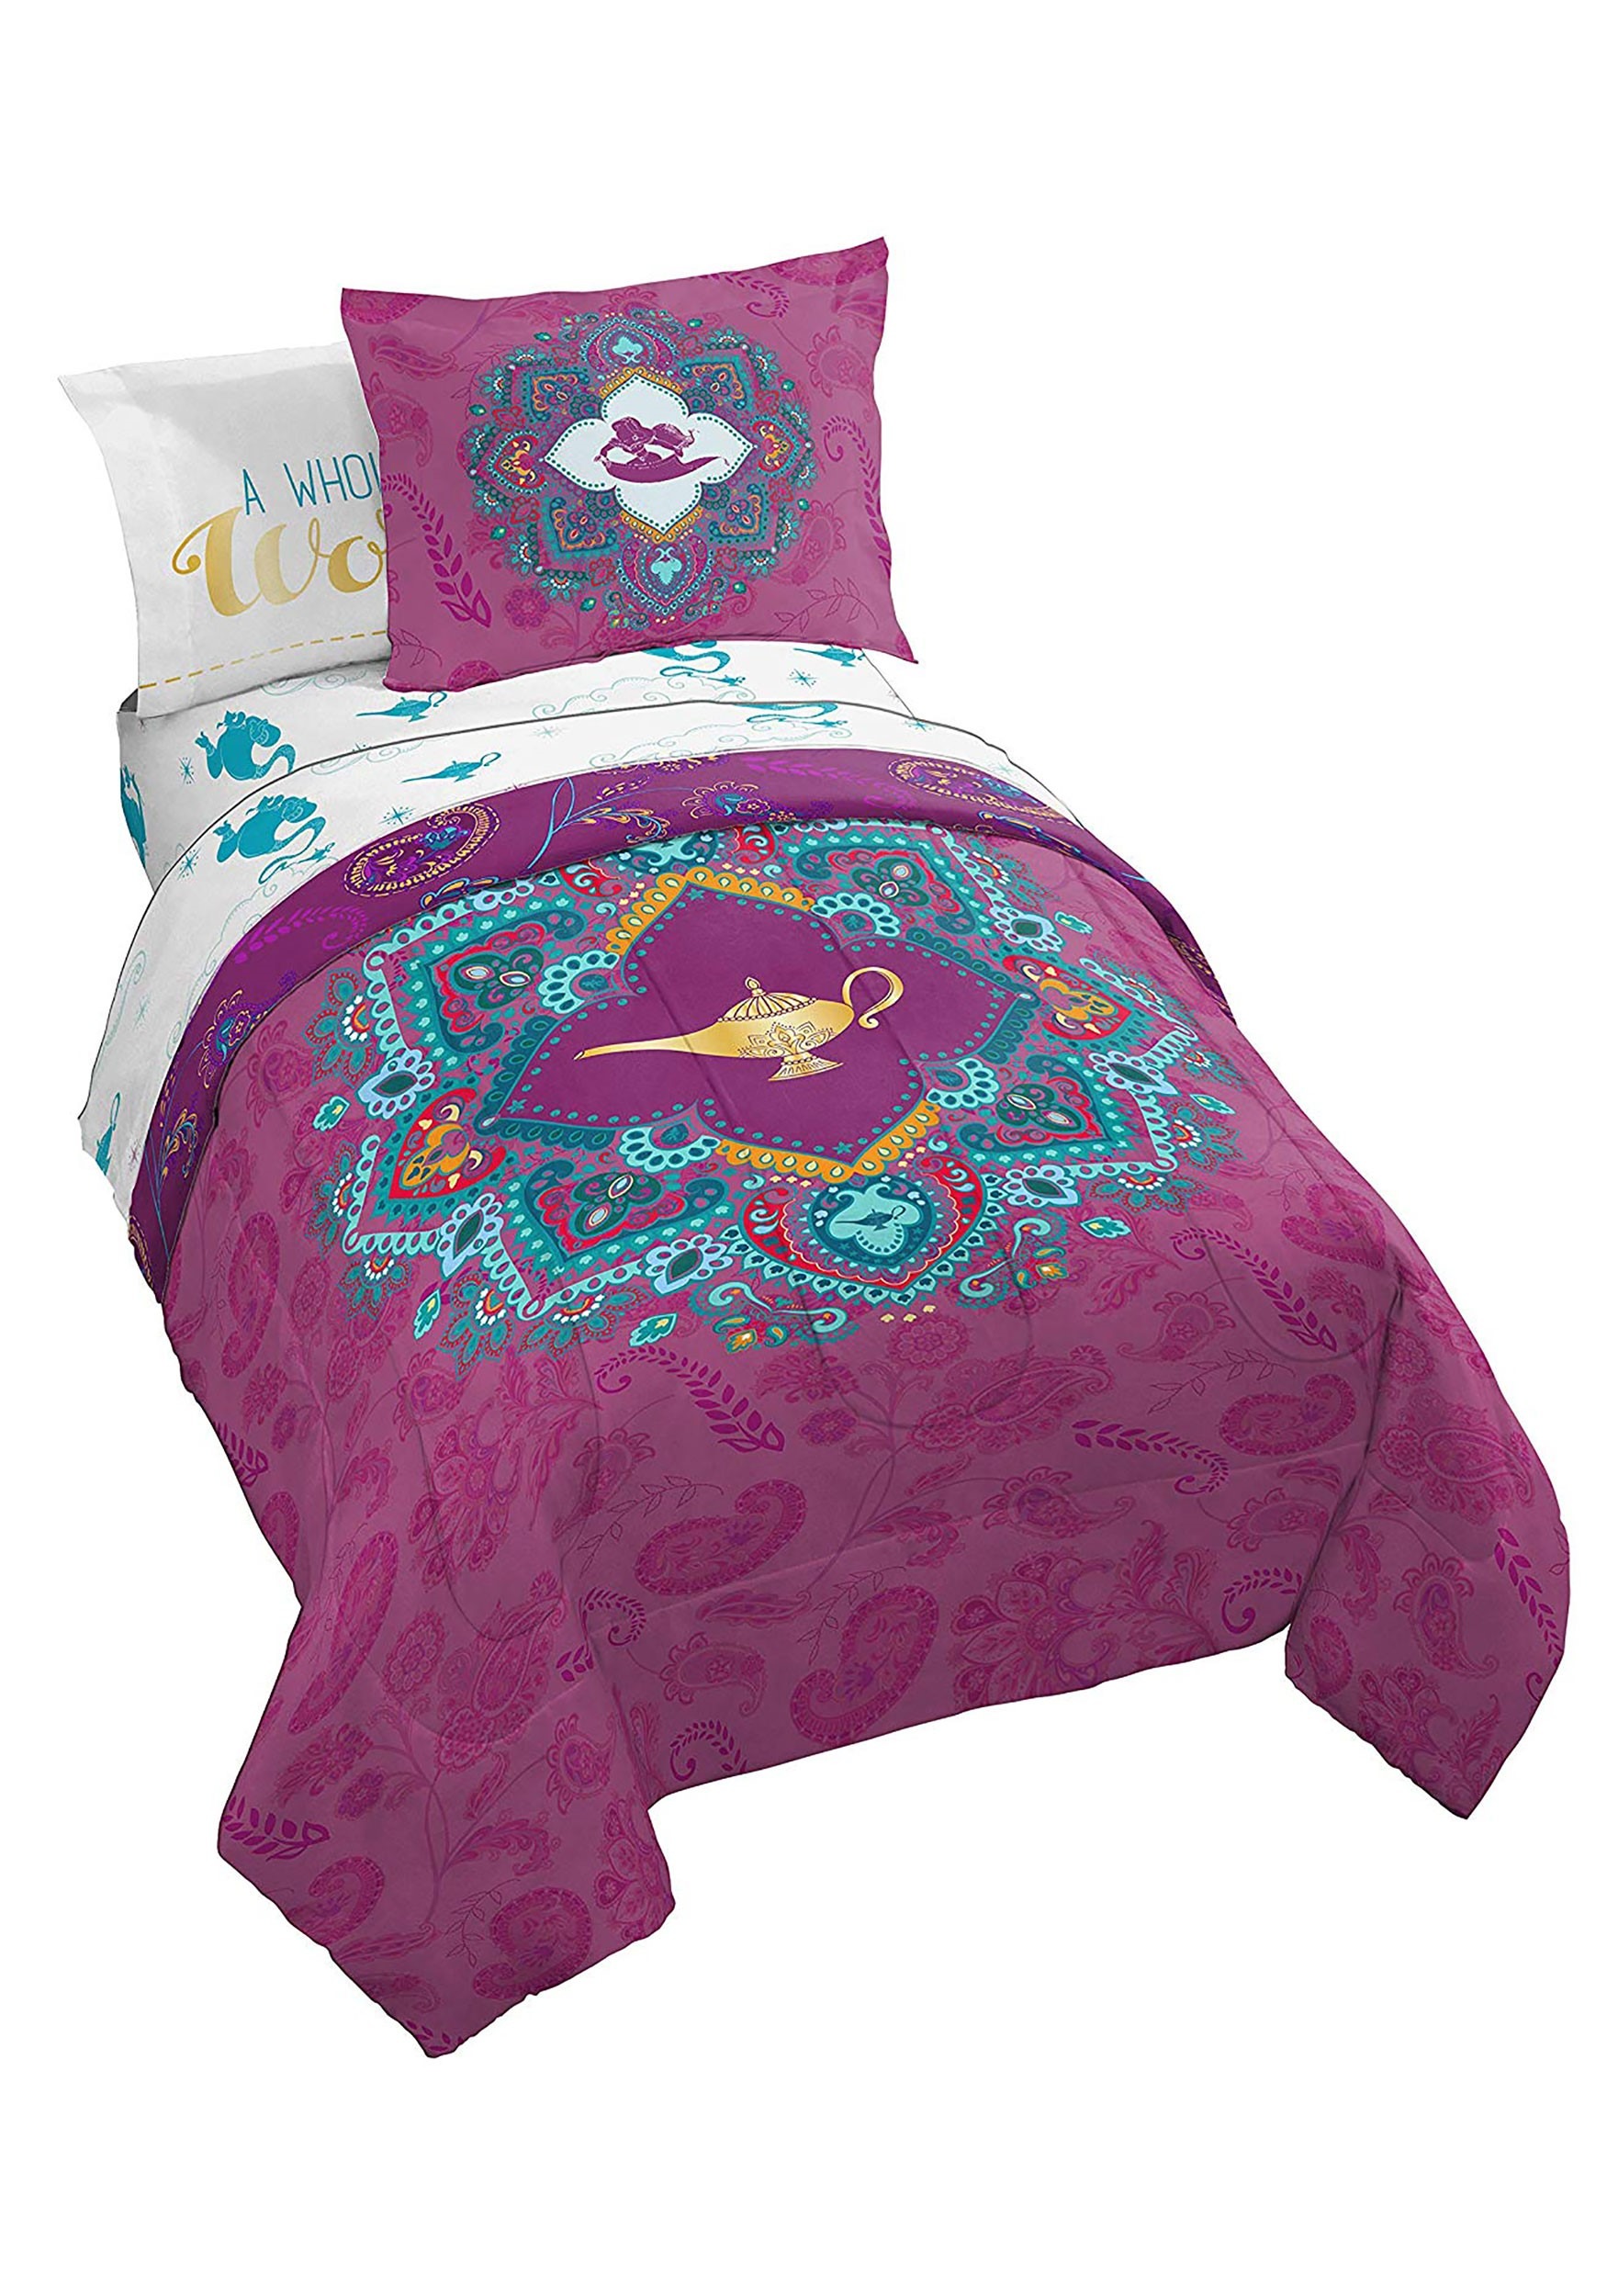 Aladdin Show You the World Bed Set for Twin Sized Beds